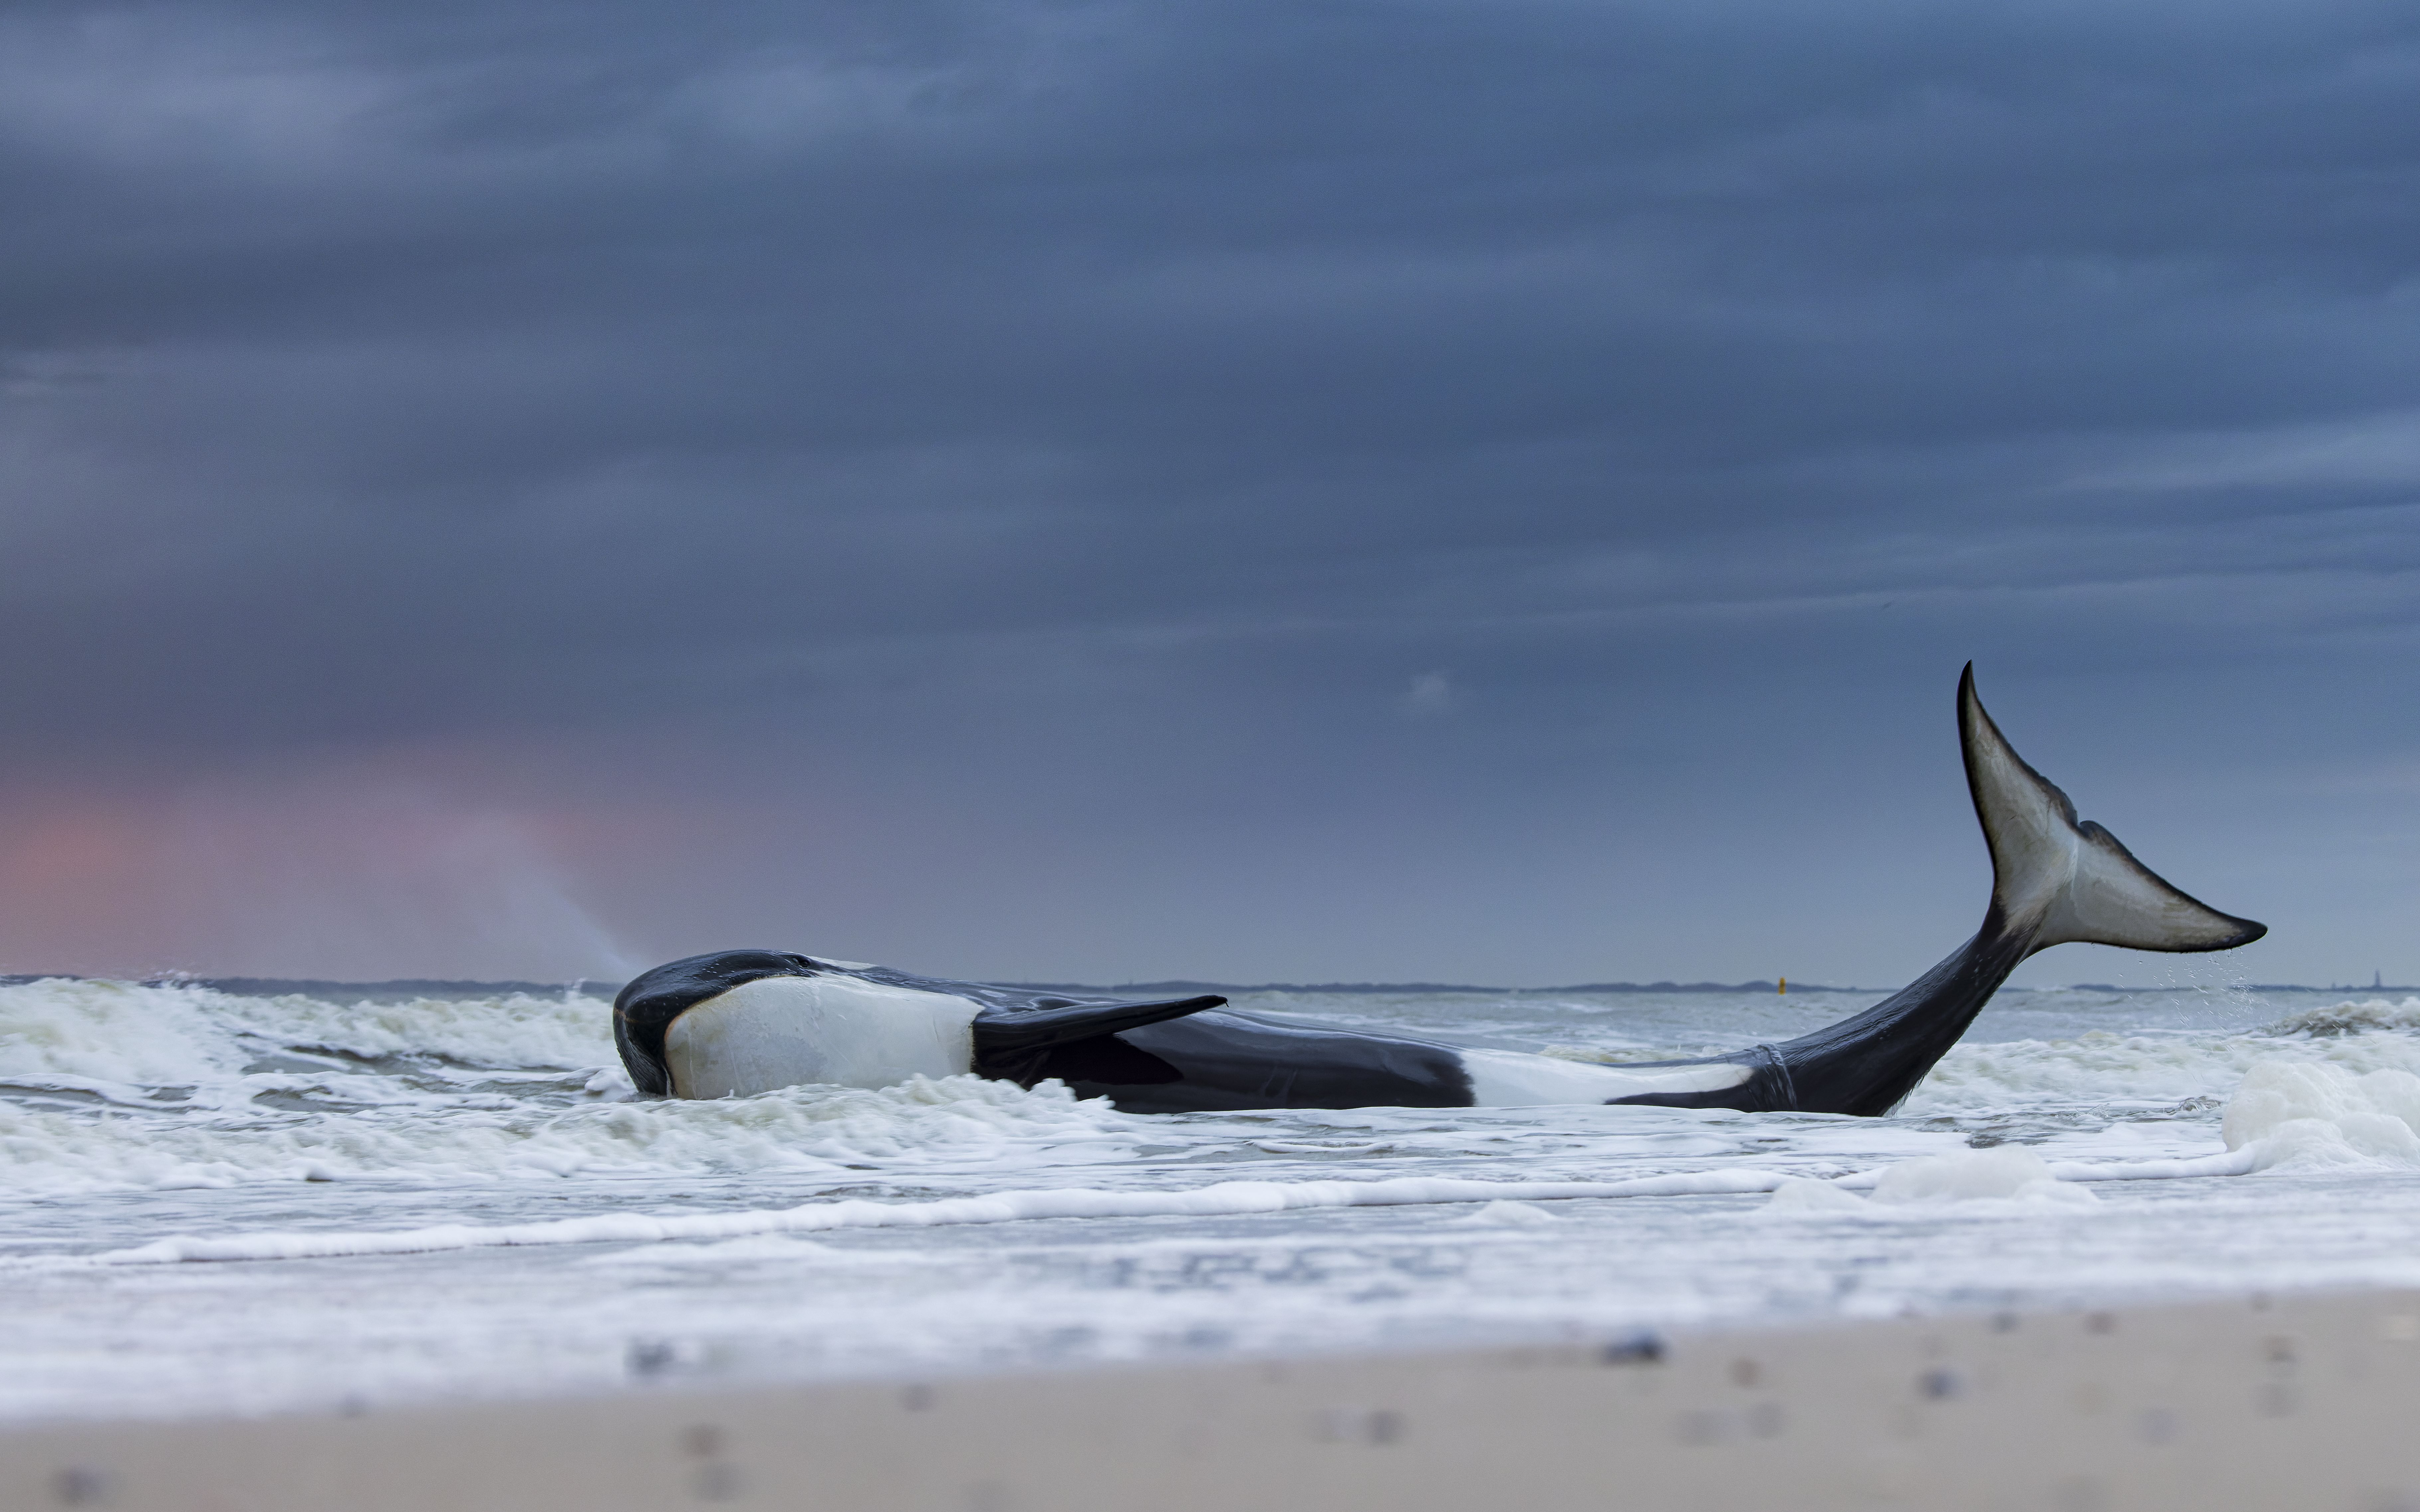 Beached orca